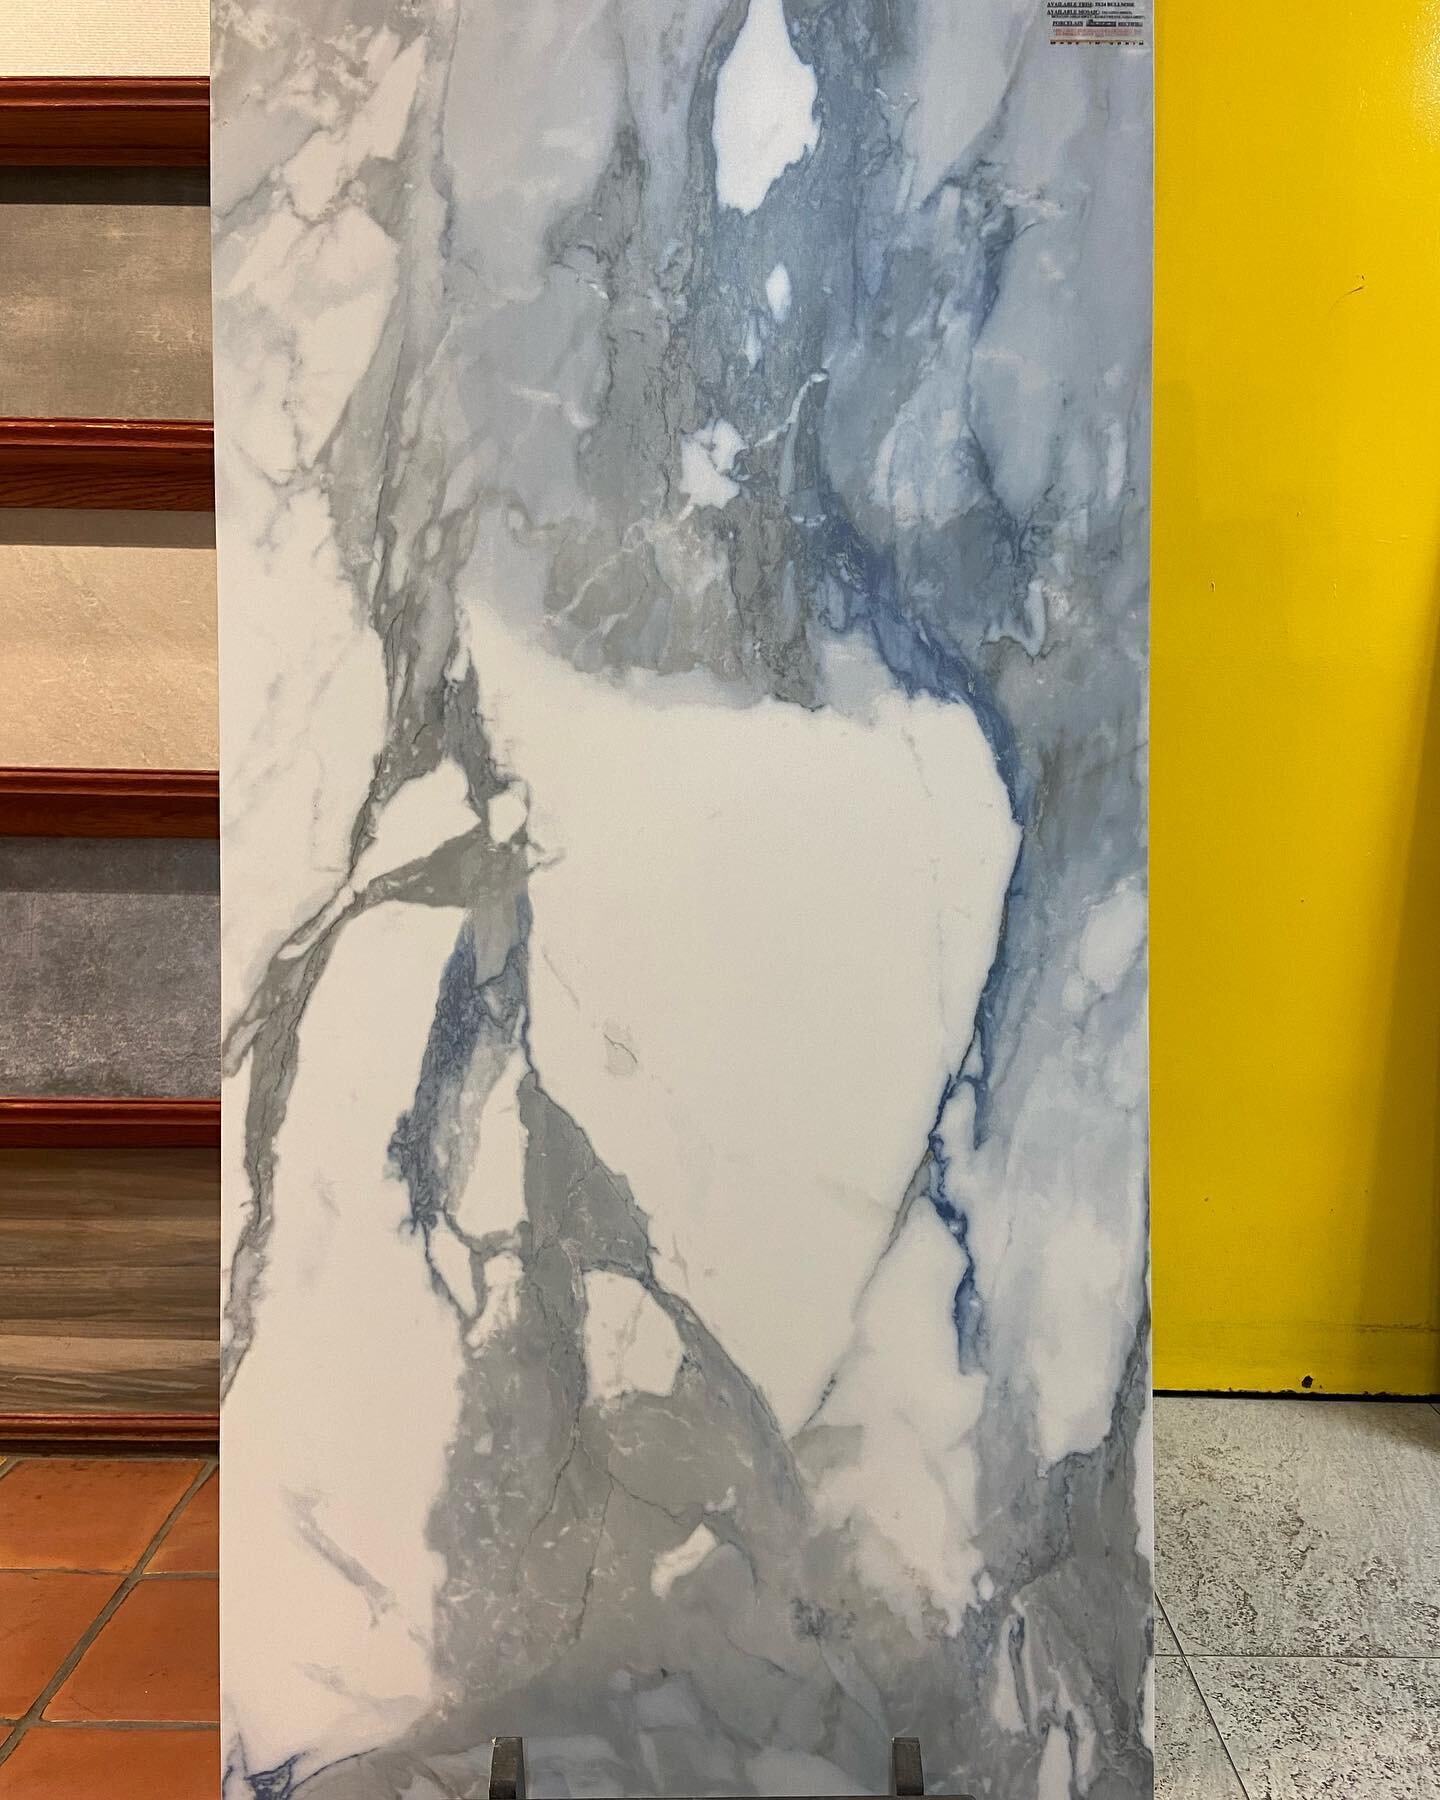 The bigger the better! 24&rdquo;x48&rdquo; porcelain tiles. Matte and polished finishes available in some styles. Come in today to take a look at Mosaicos Jalisco!
1513 N Pulaski Rd
Chicago, IL 60651
773-276-8388

#tile #tiles #mosaic #porcelaintiles